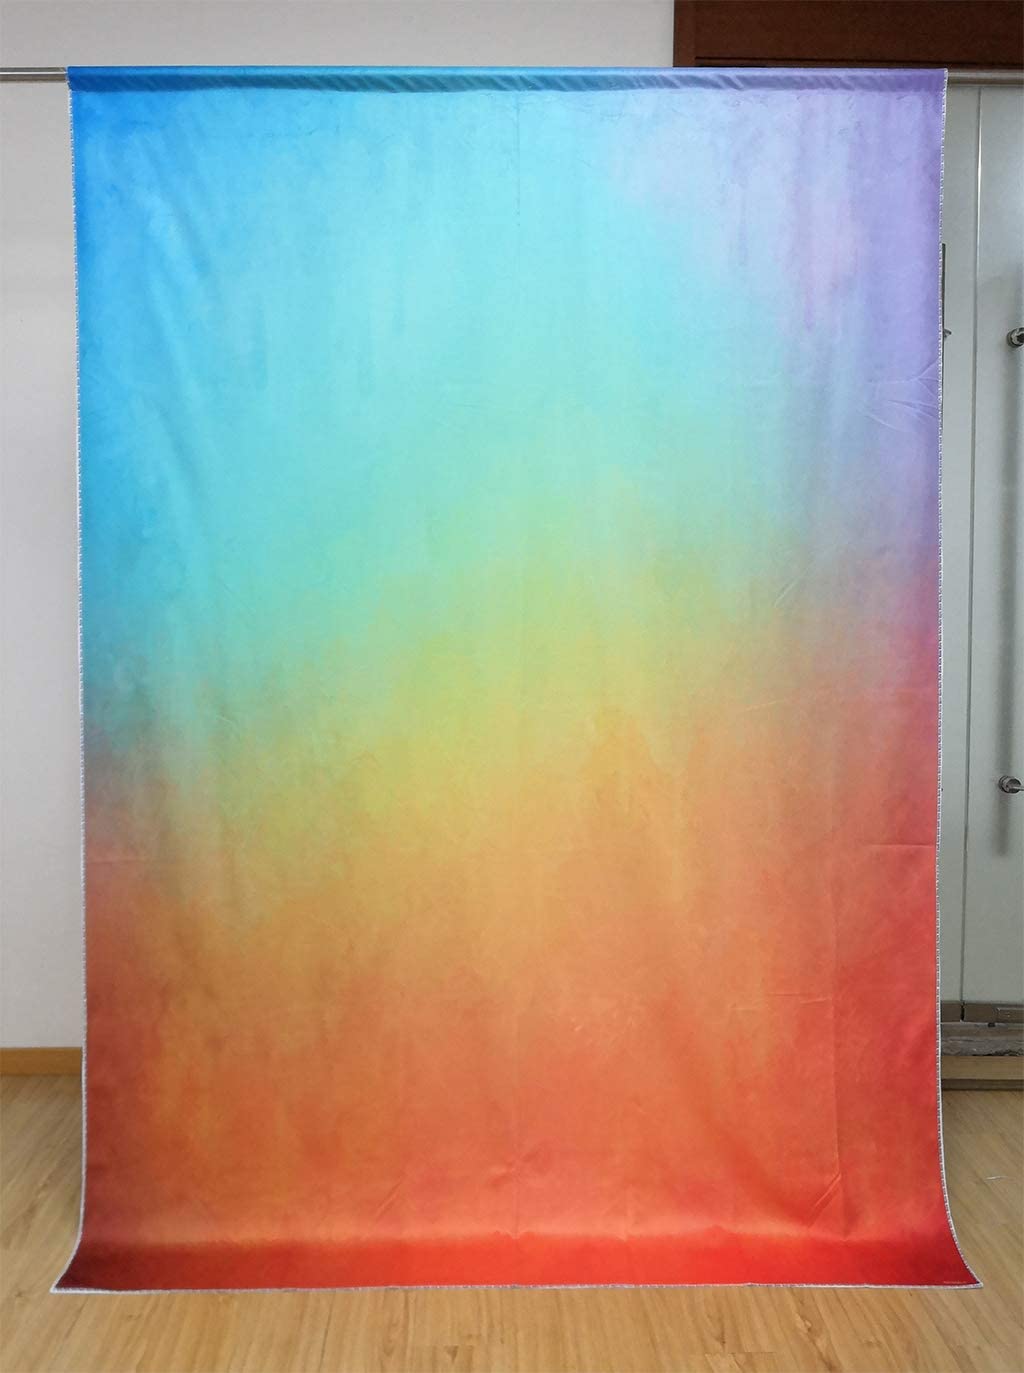 Dradient  Colorful Abstract Photography Backdrop